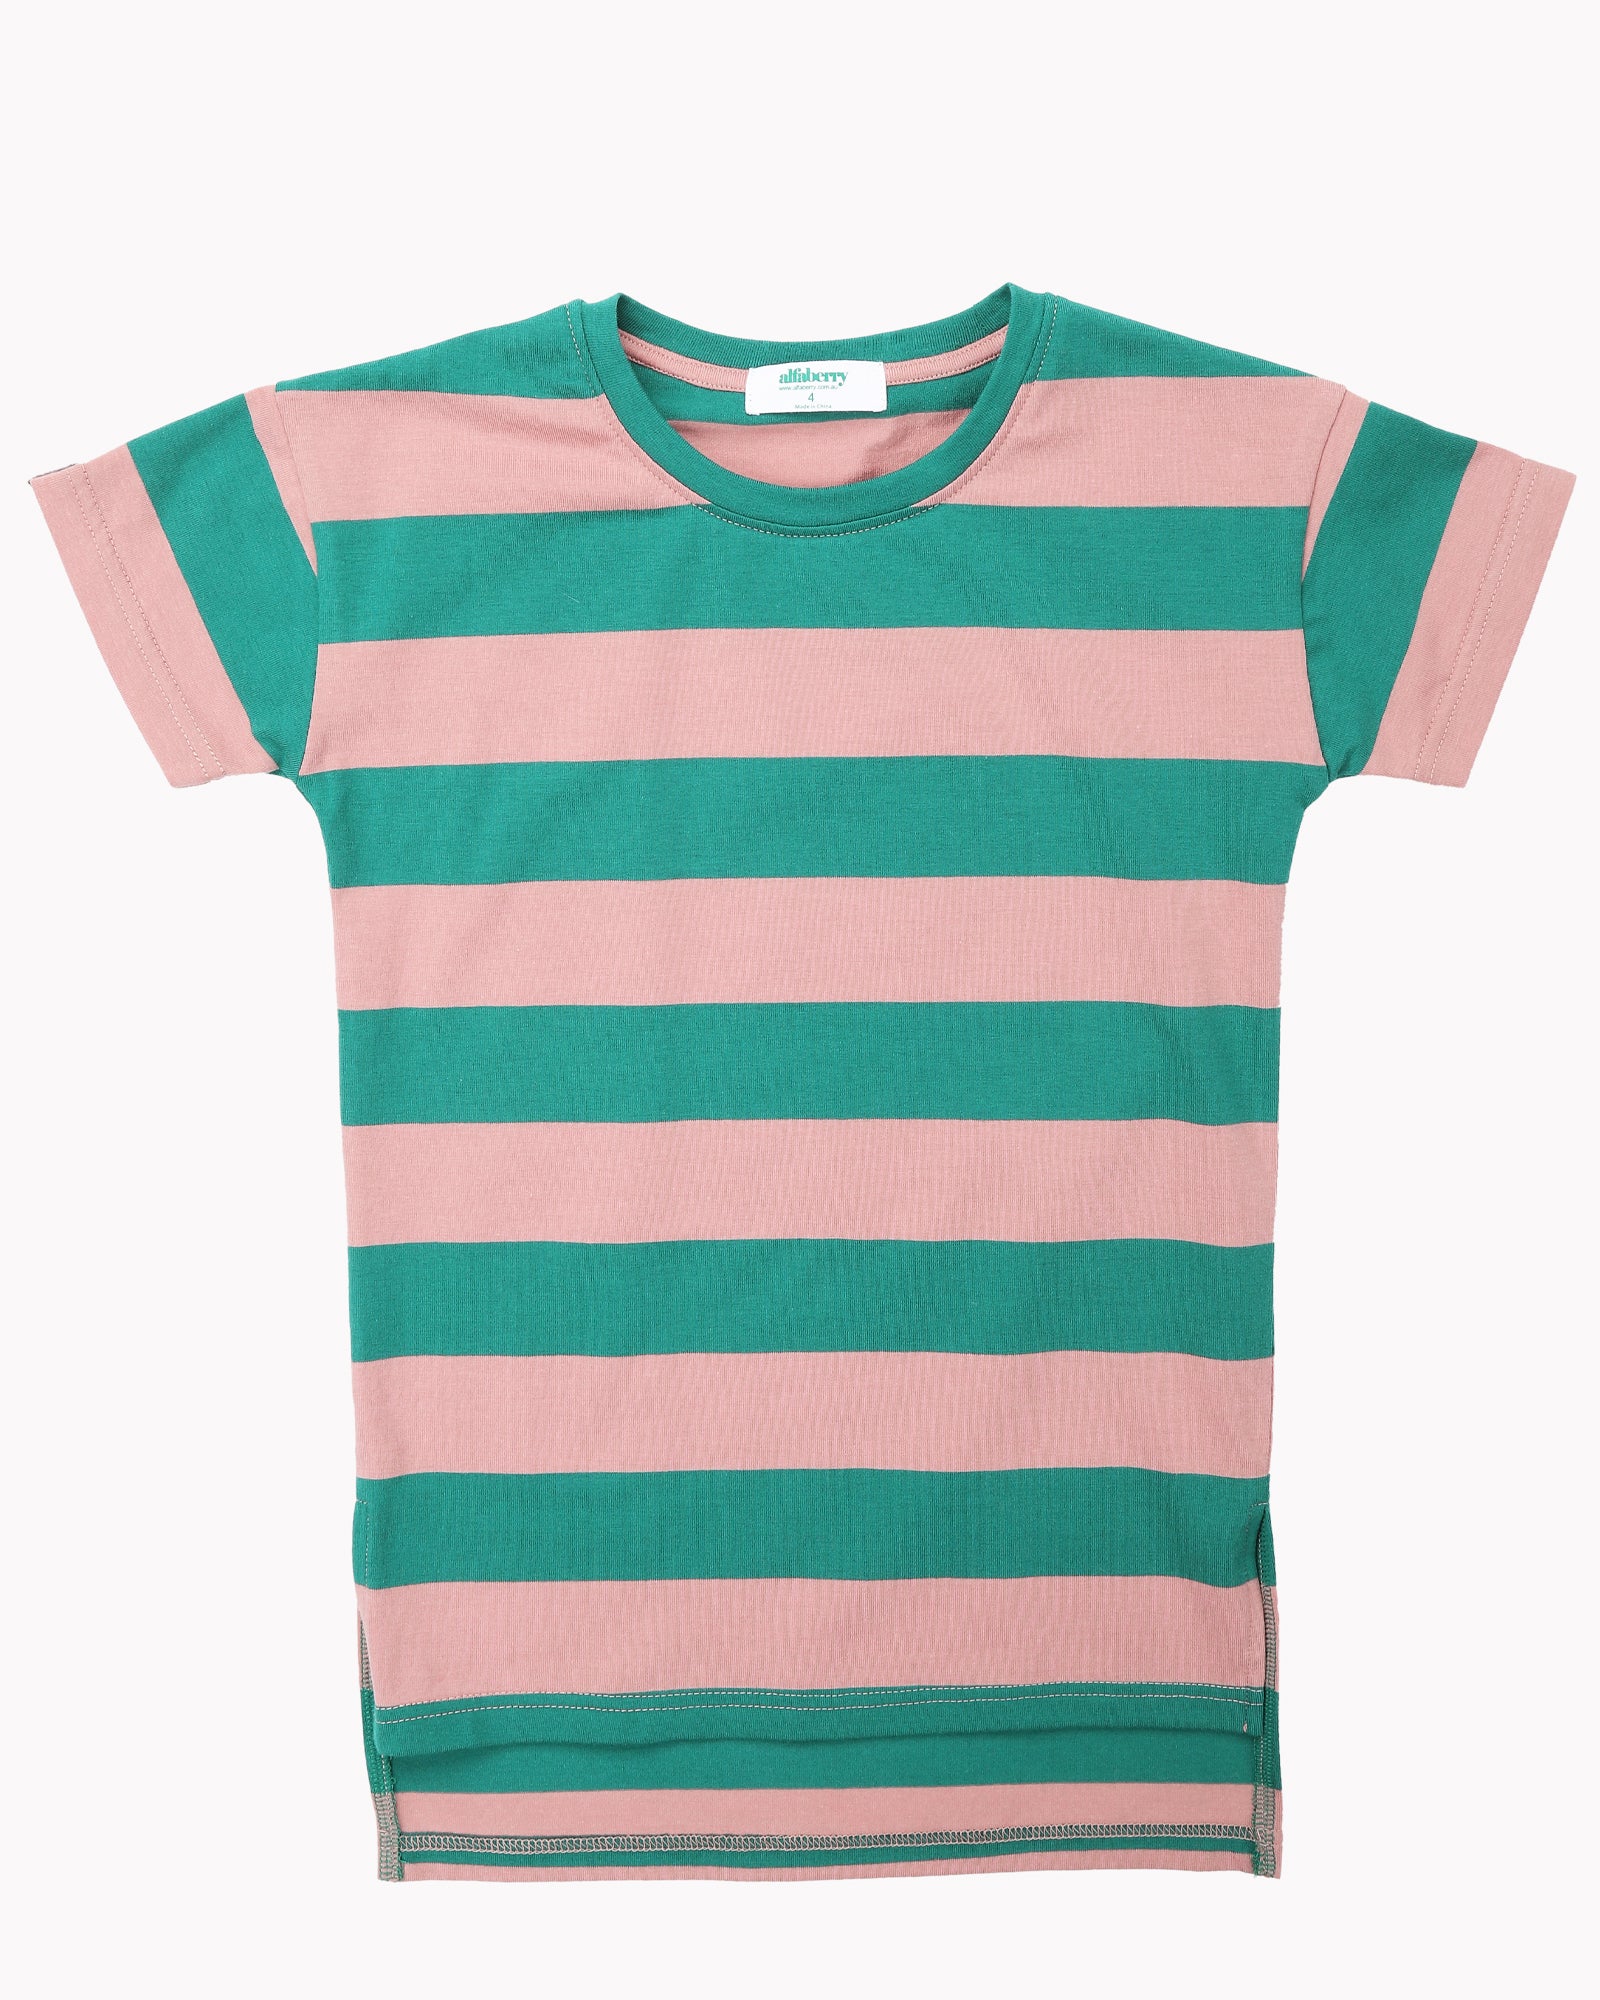 Wide Stripes T-Shirt Dress In Green and Salmon (NO RETURN) | alfaberry ...